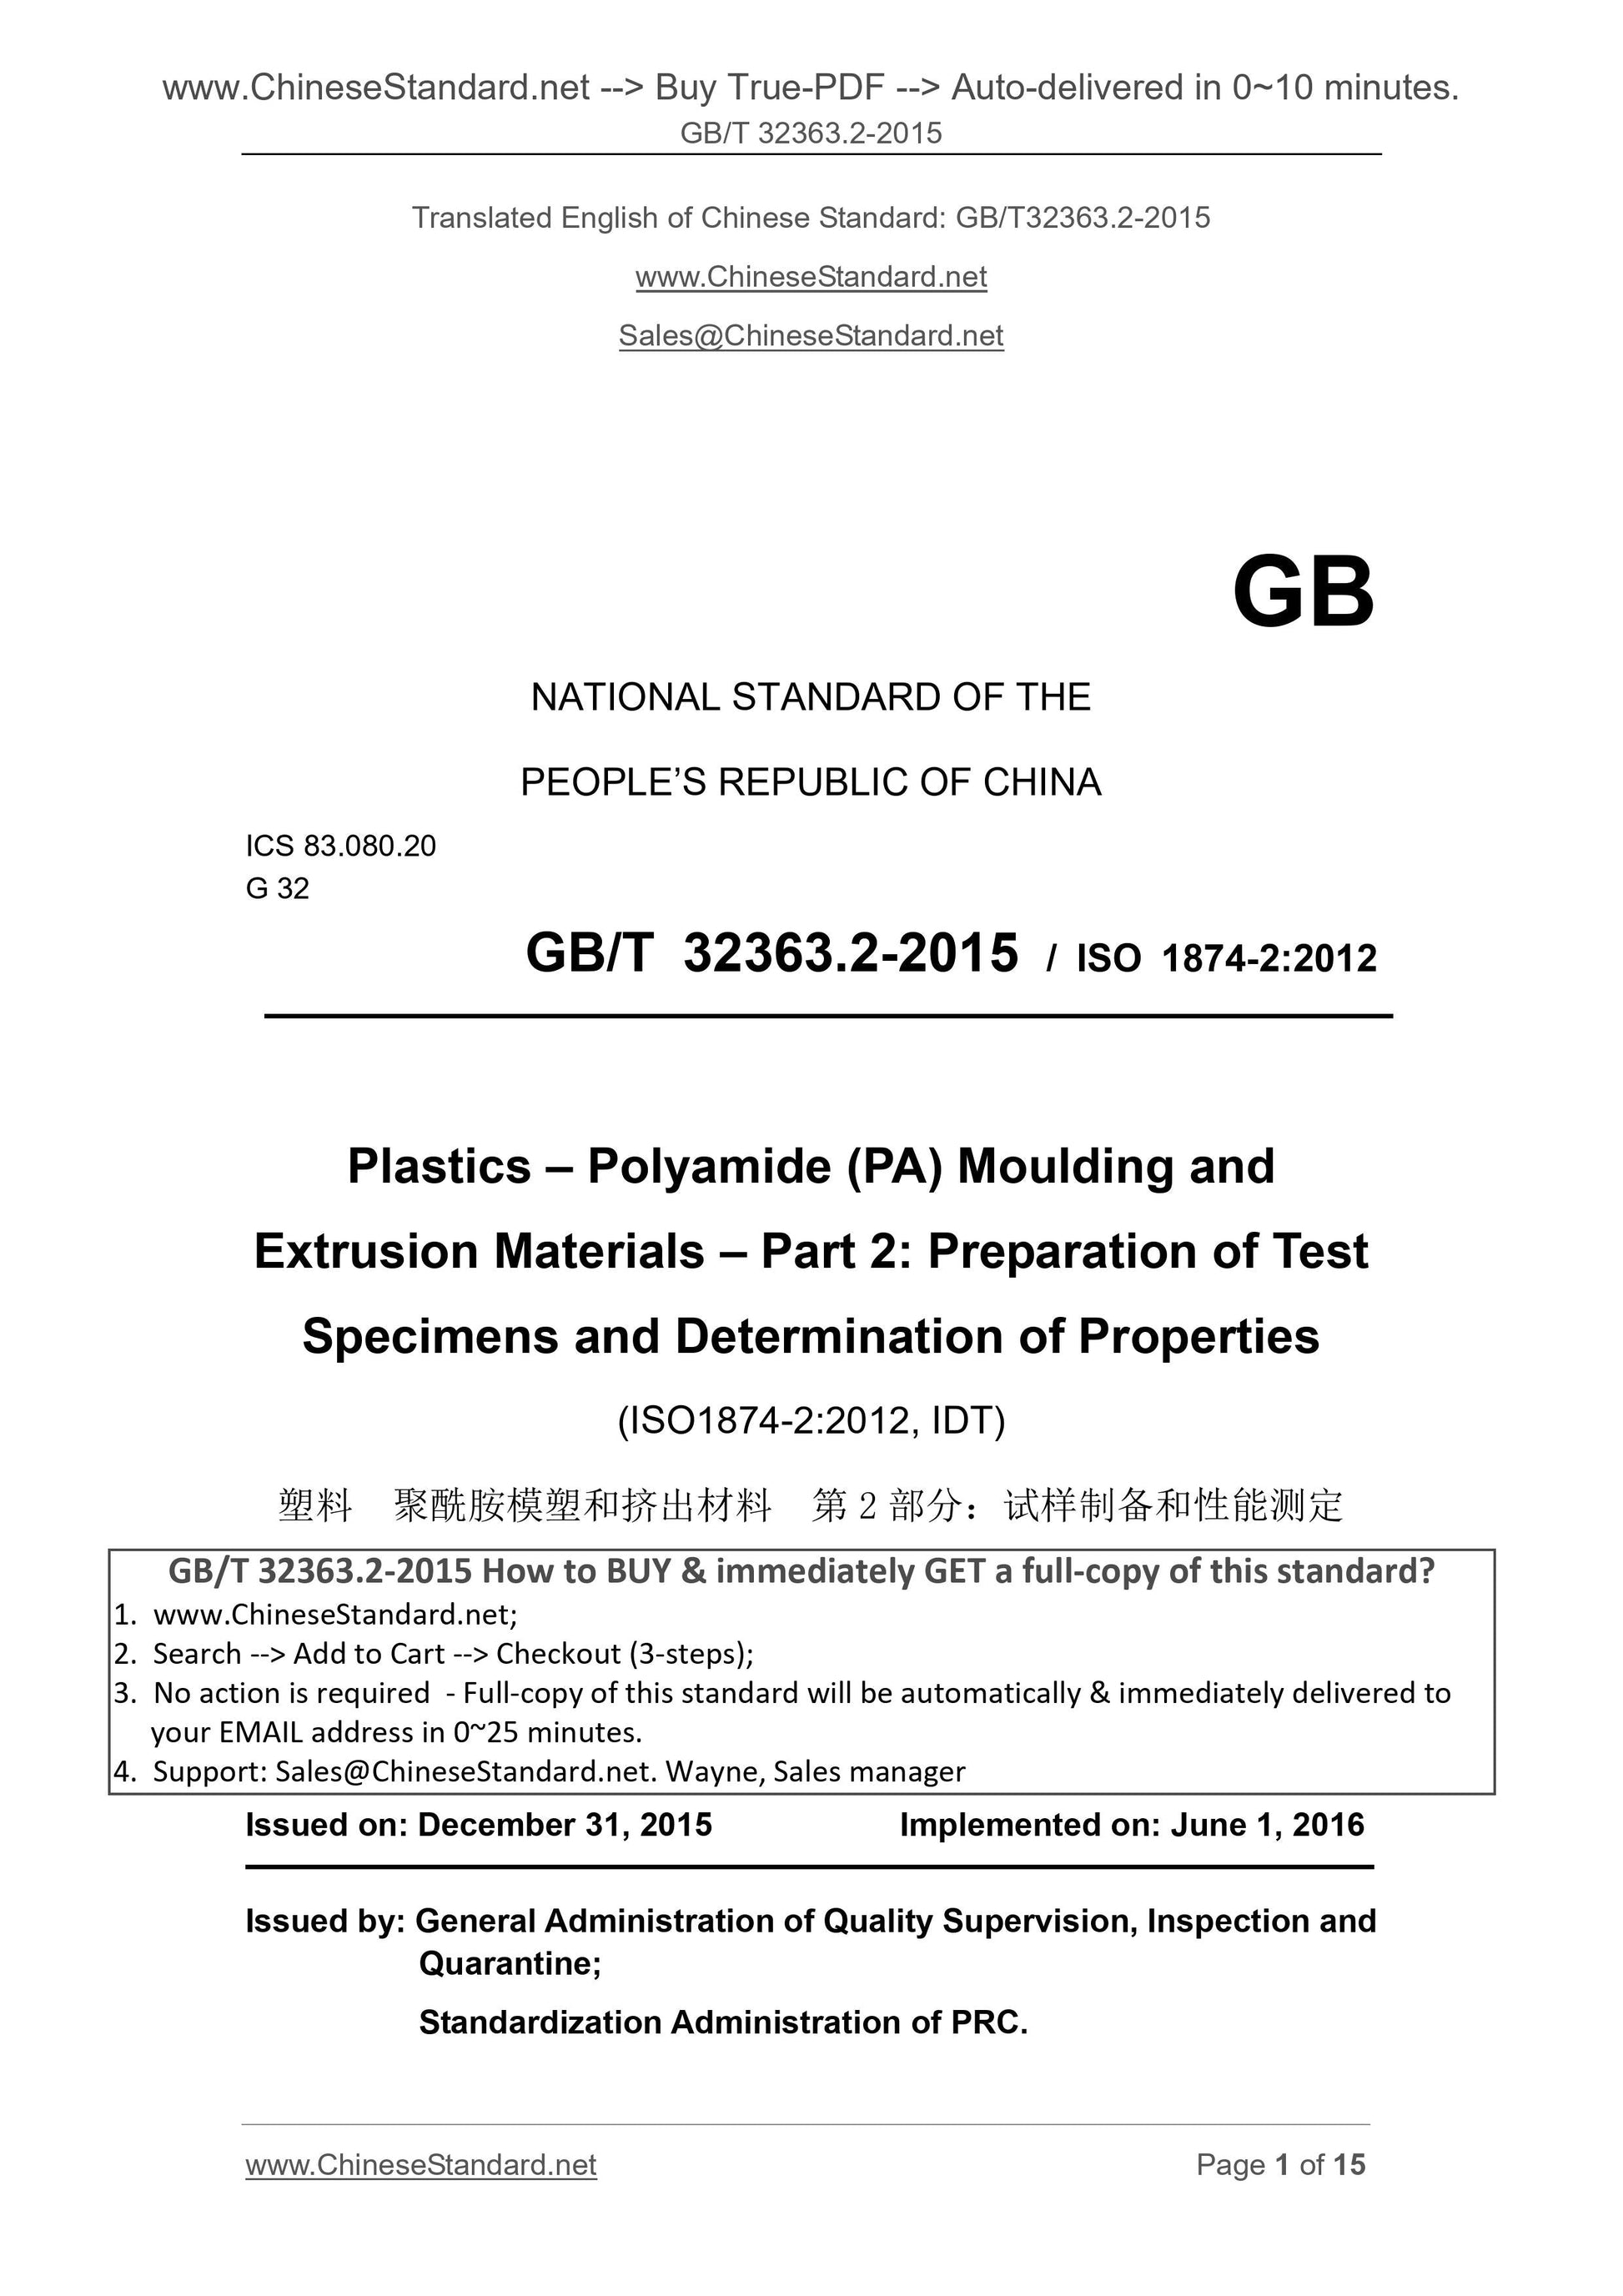 GB/T 32363.2-2015 Page 1